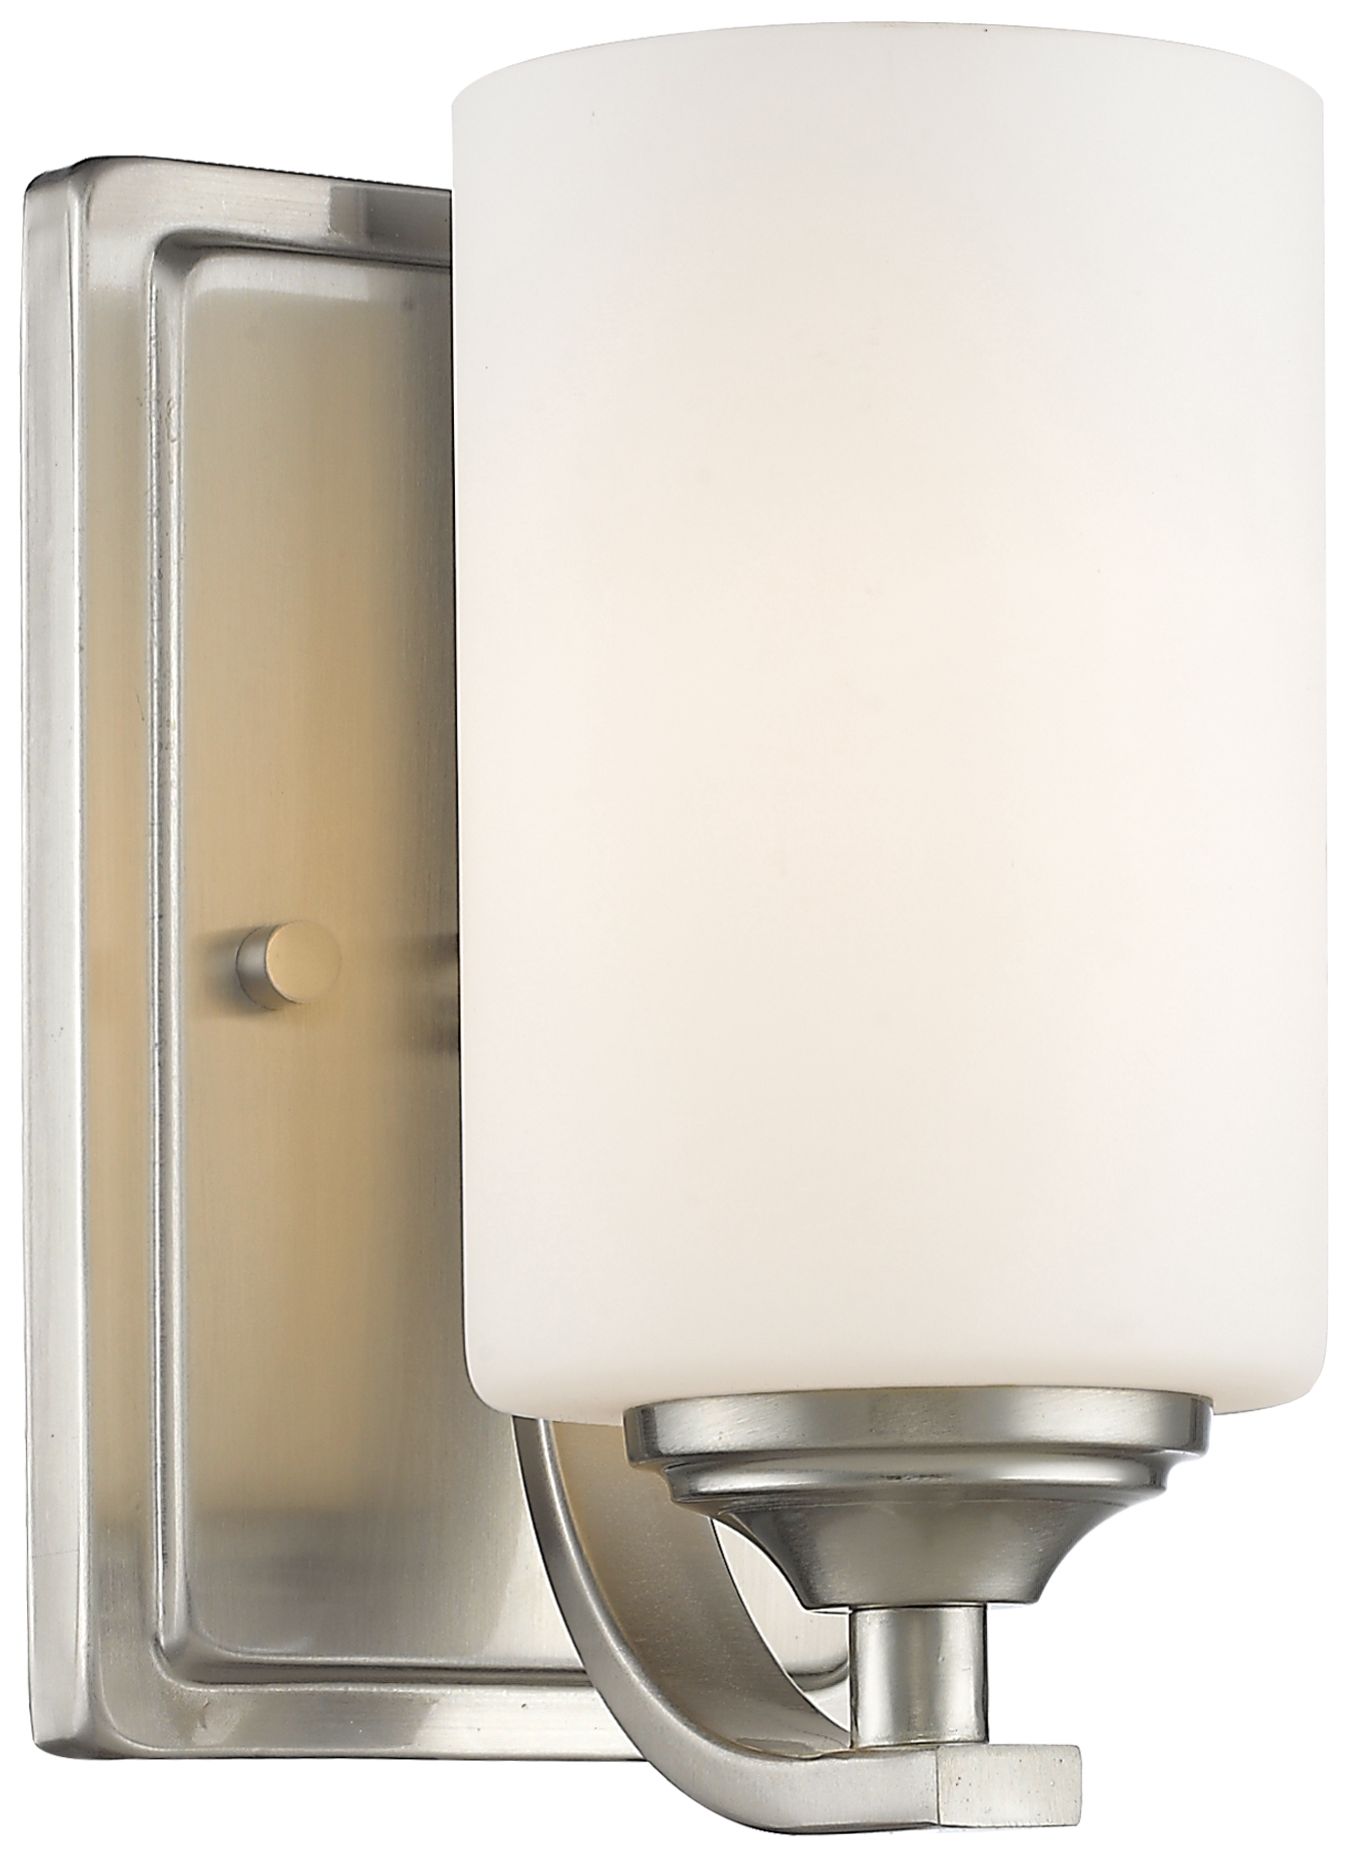 Bordeaux by Z-Lite Brushed Nickel 1 Light Wall Sconce